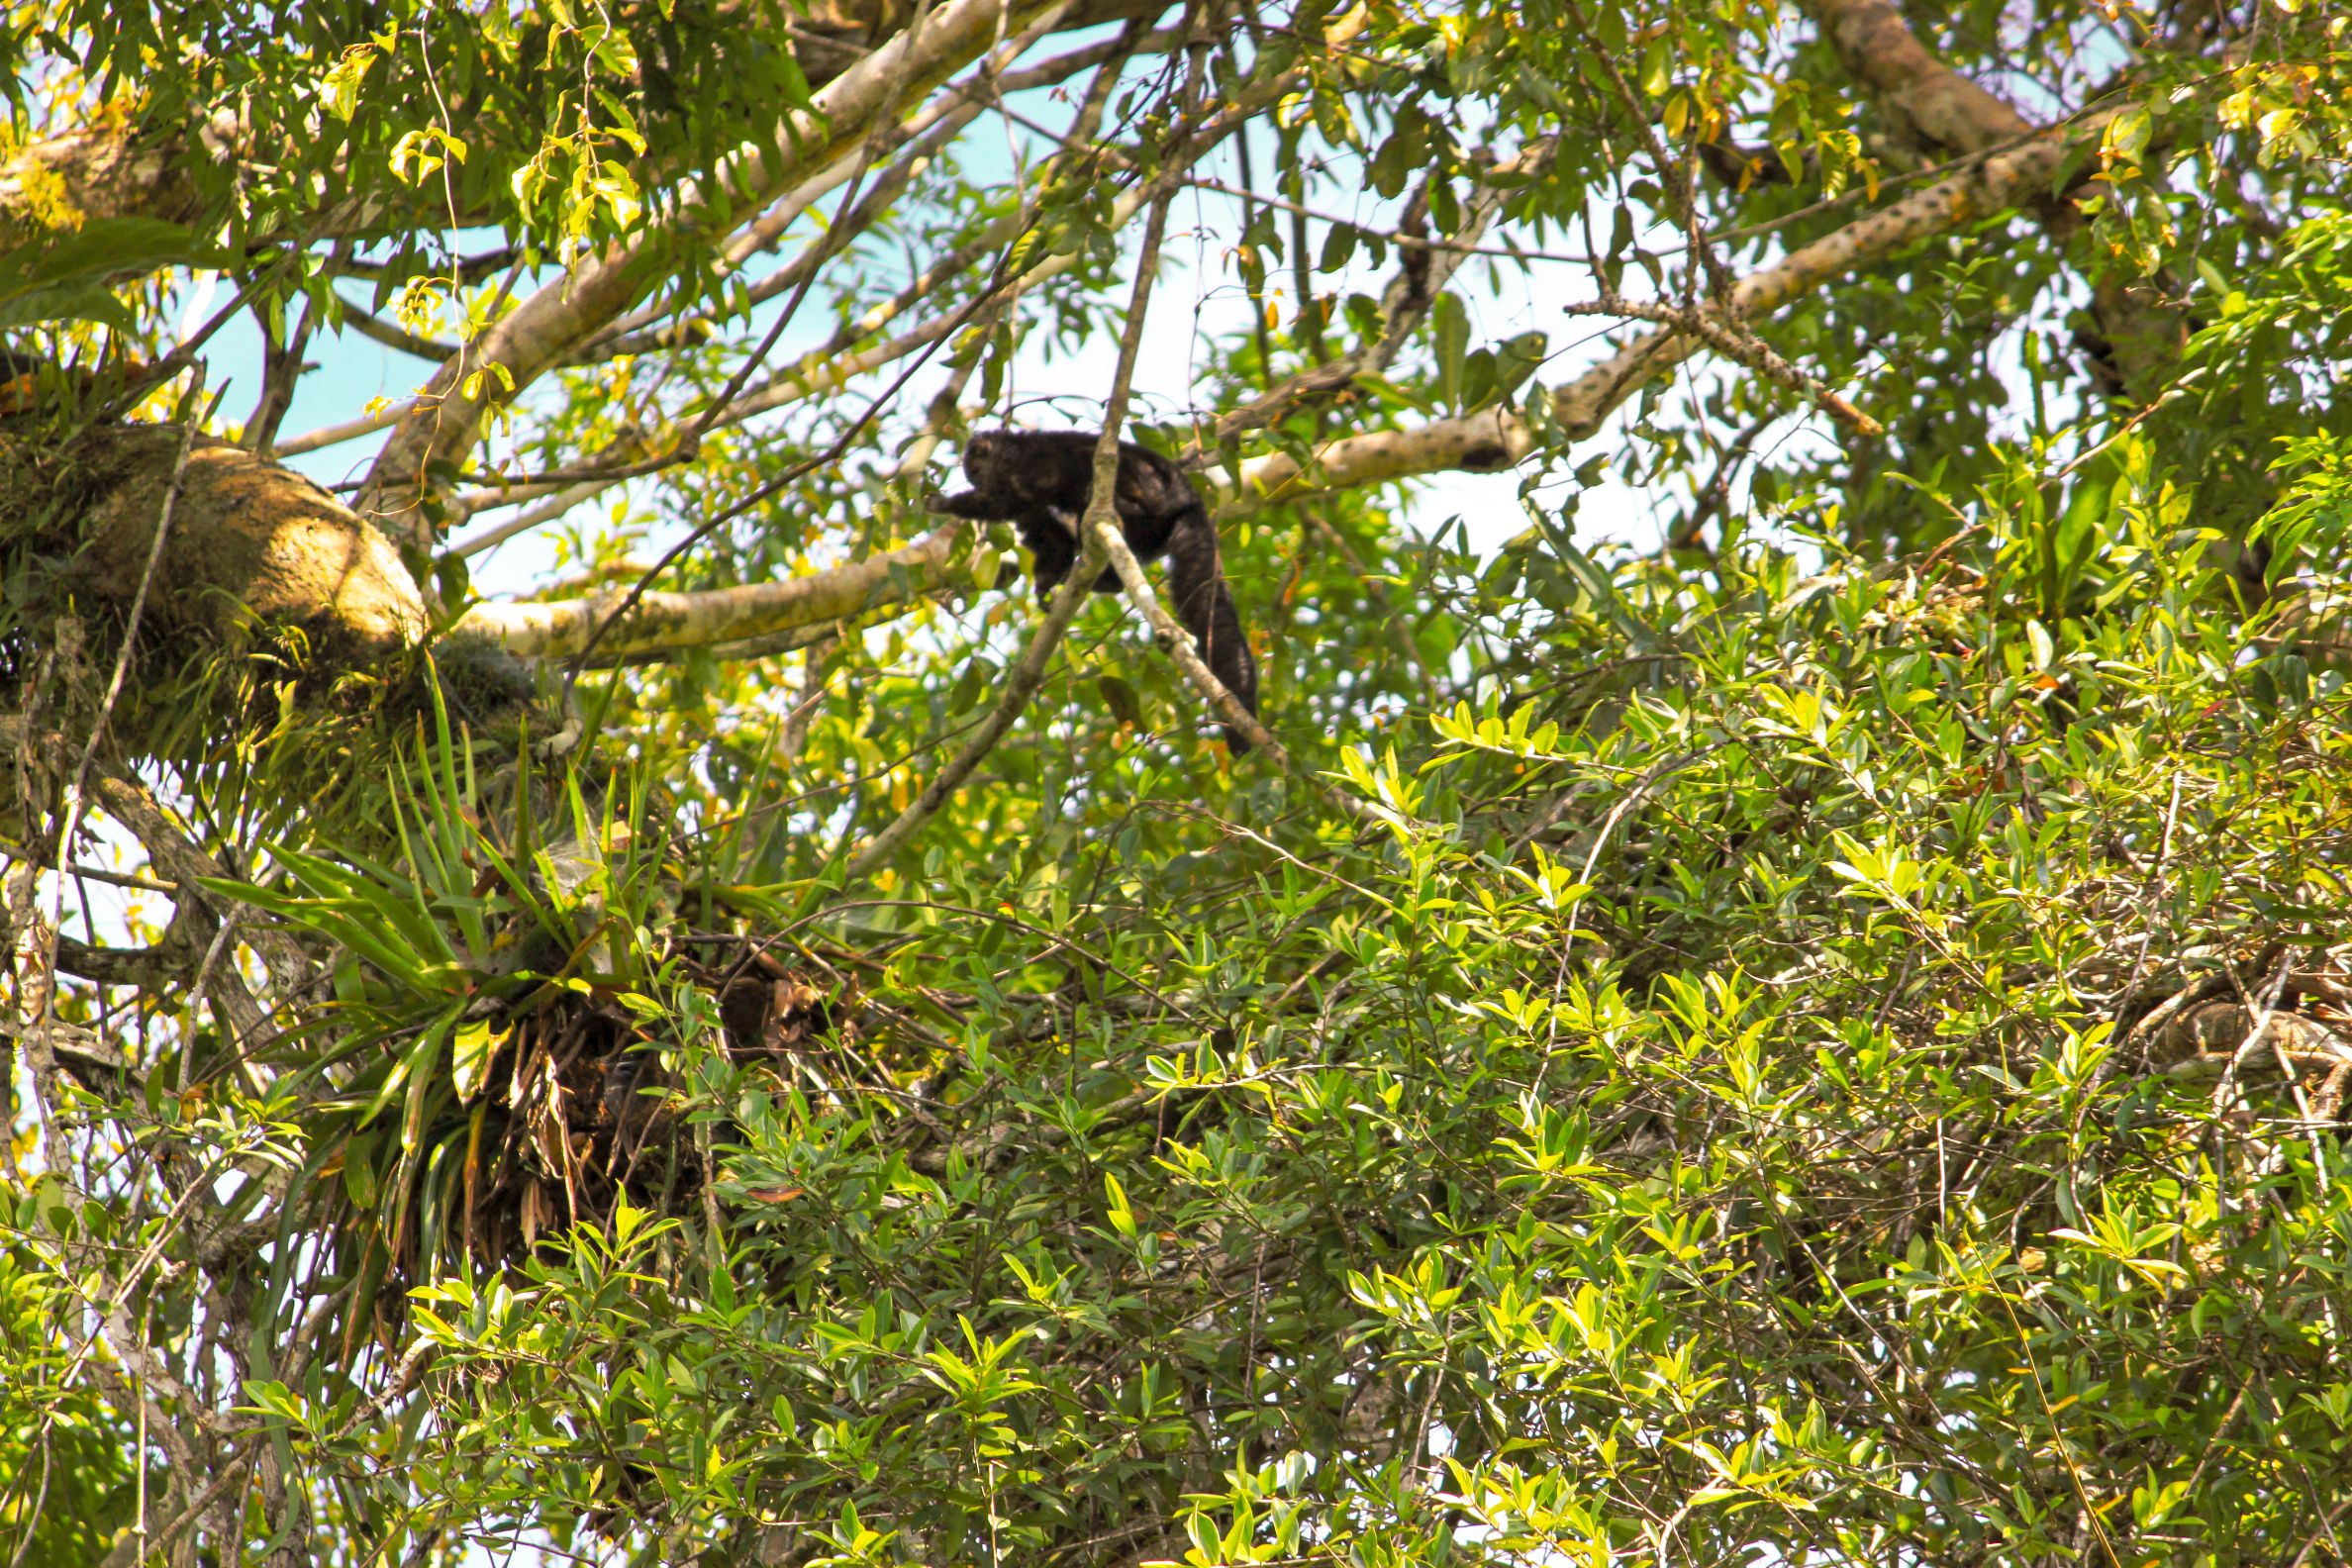 A picture of a wild monkey in a tree in Laticia, Colombia